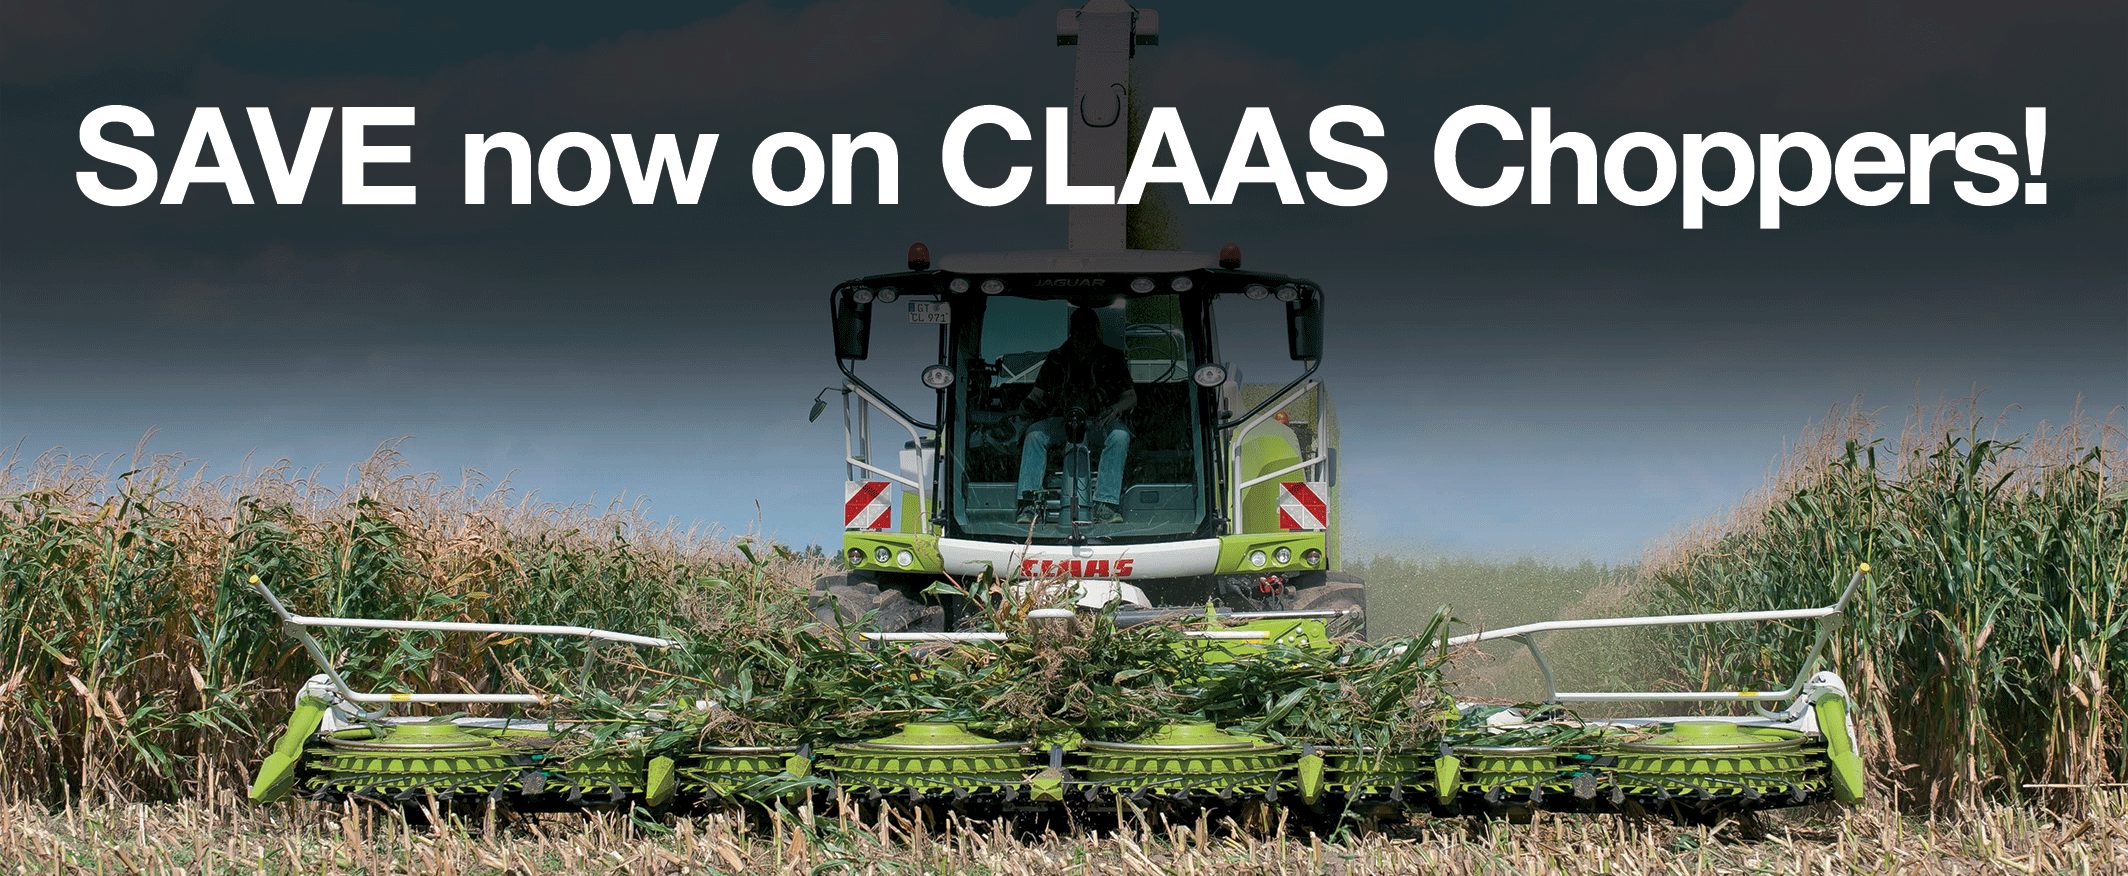 Save on CLAAS Choppers